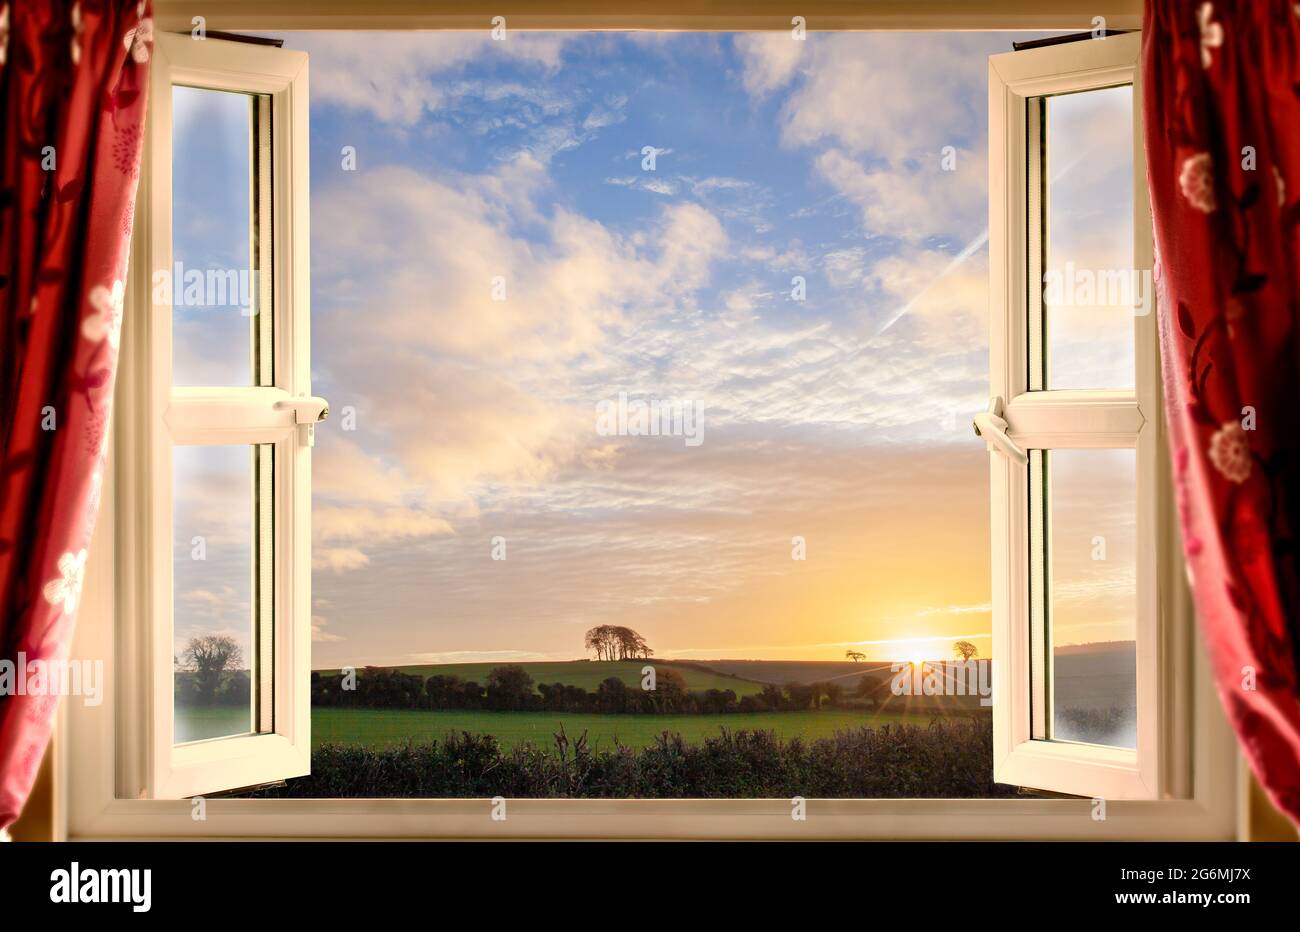 Stunning open window view onto a sunrise rural landscape in summer. Stock Photo